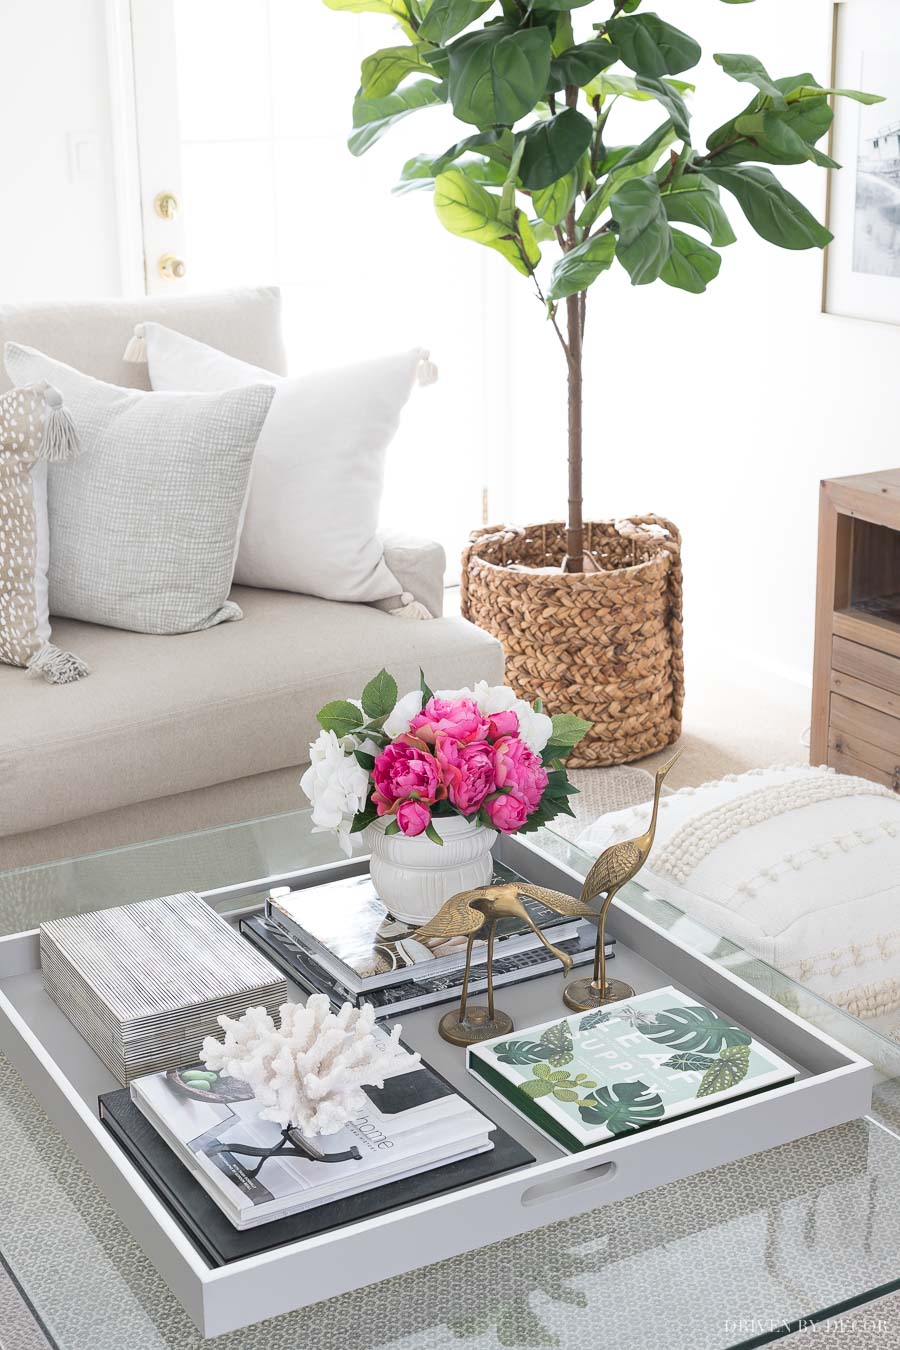 Simple Tips for Decorating with Coffee Table Books